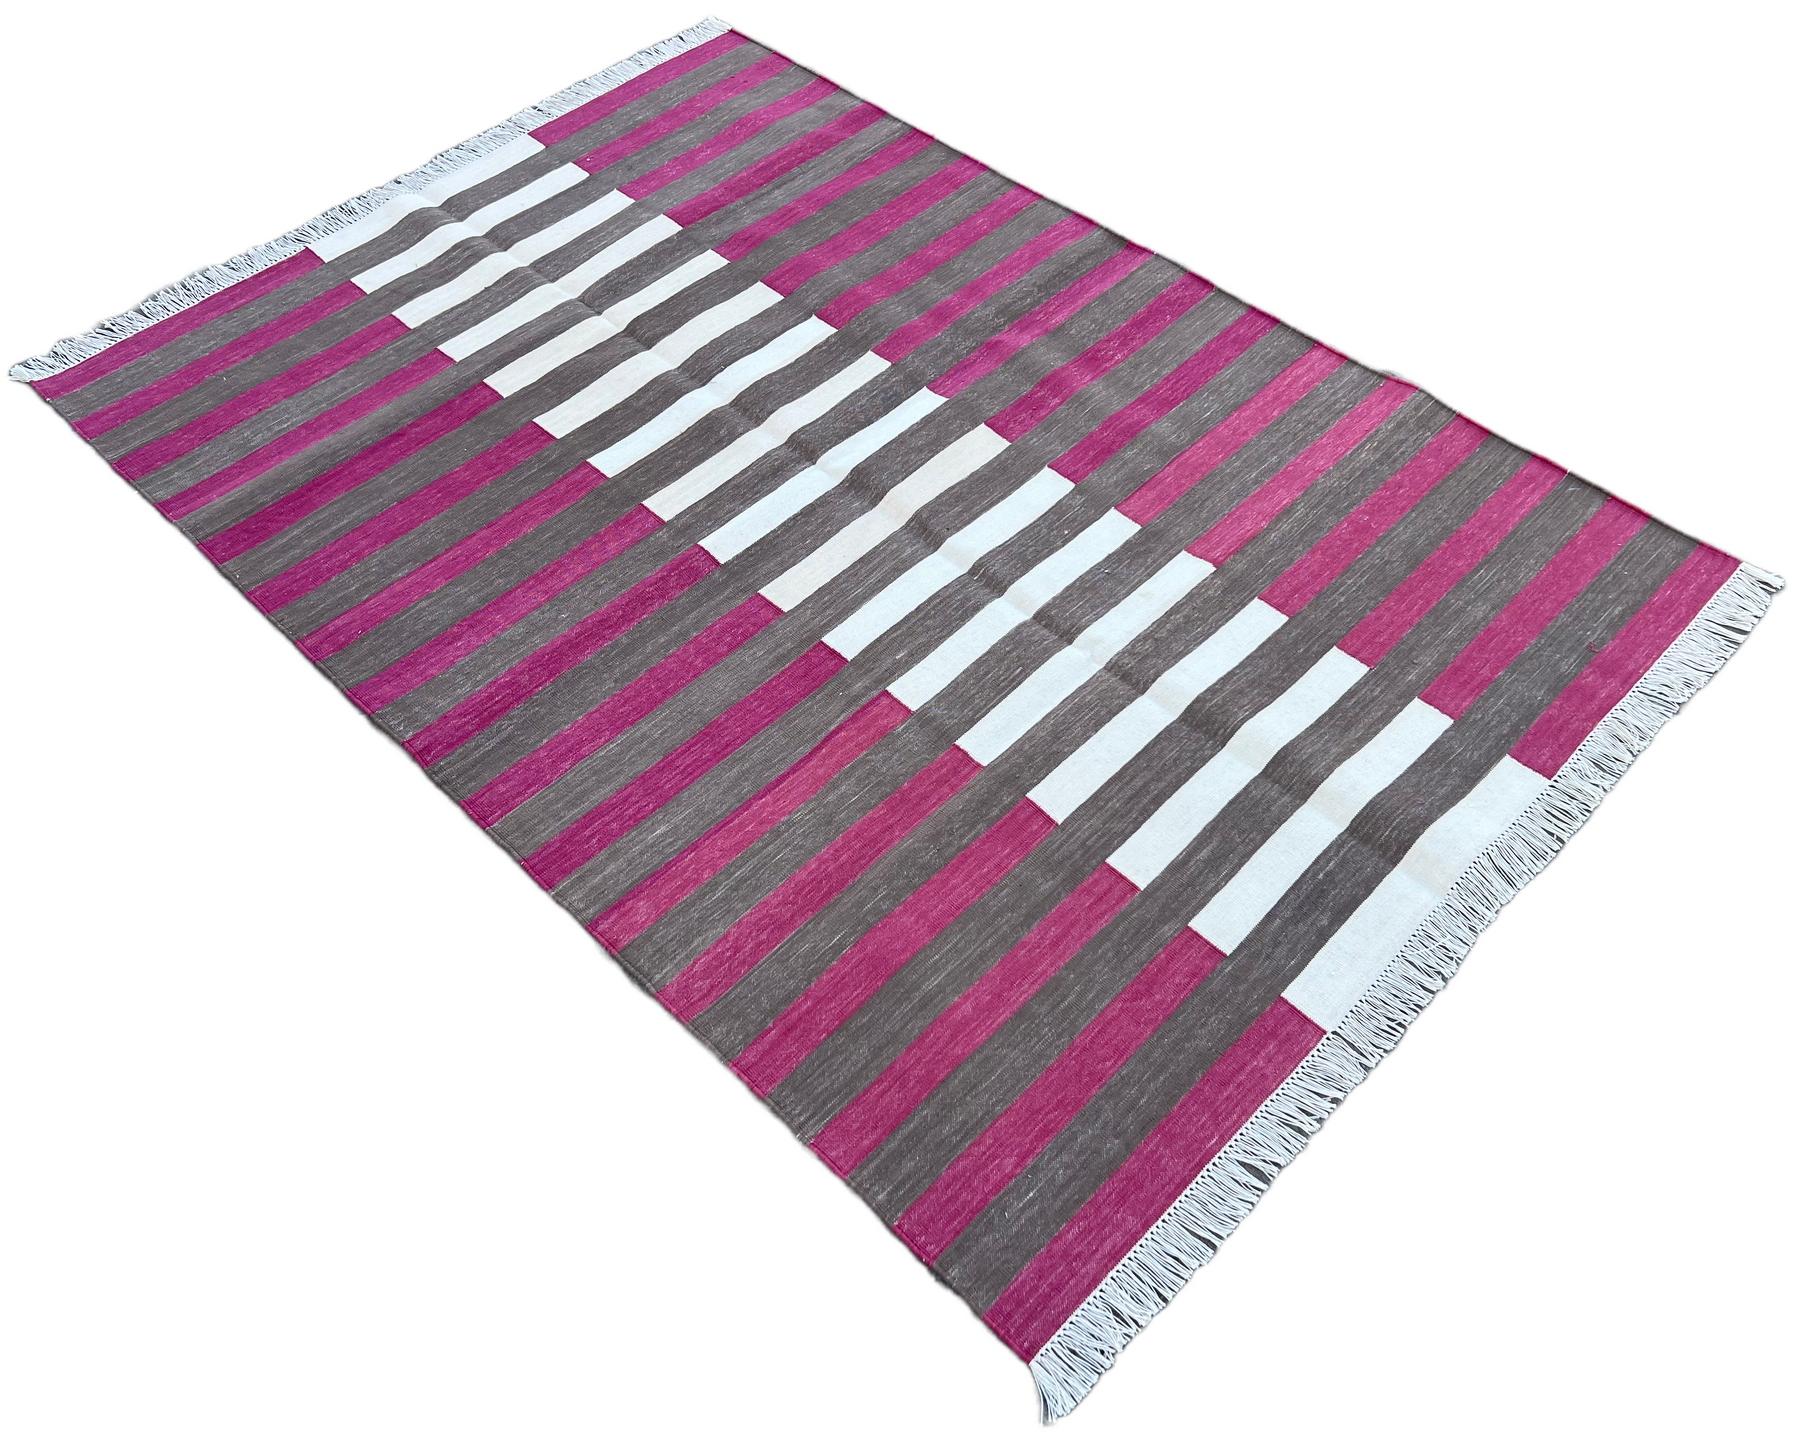 Cotton Vegetable Dyed Brown , Cream And Raspberry Pink Striped Indian Dhurrie Rug-4'x6' 
These special flat-weave dhurries are hand-woven with 15 ply 100% cotton yarn. Due to the special manufacturing techniques used to create our rugs, the size and